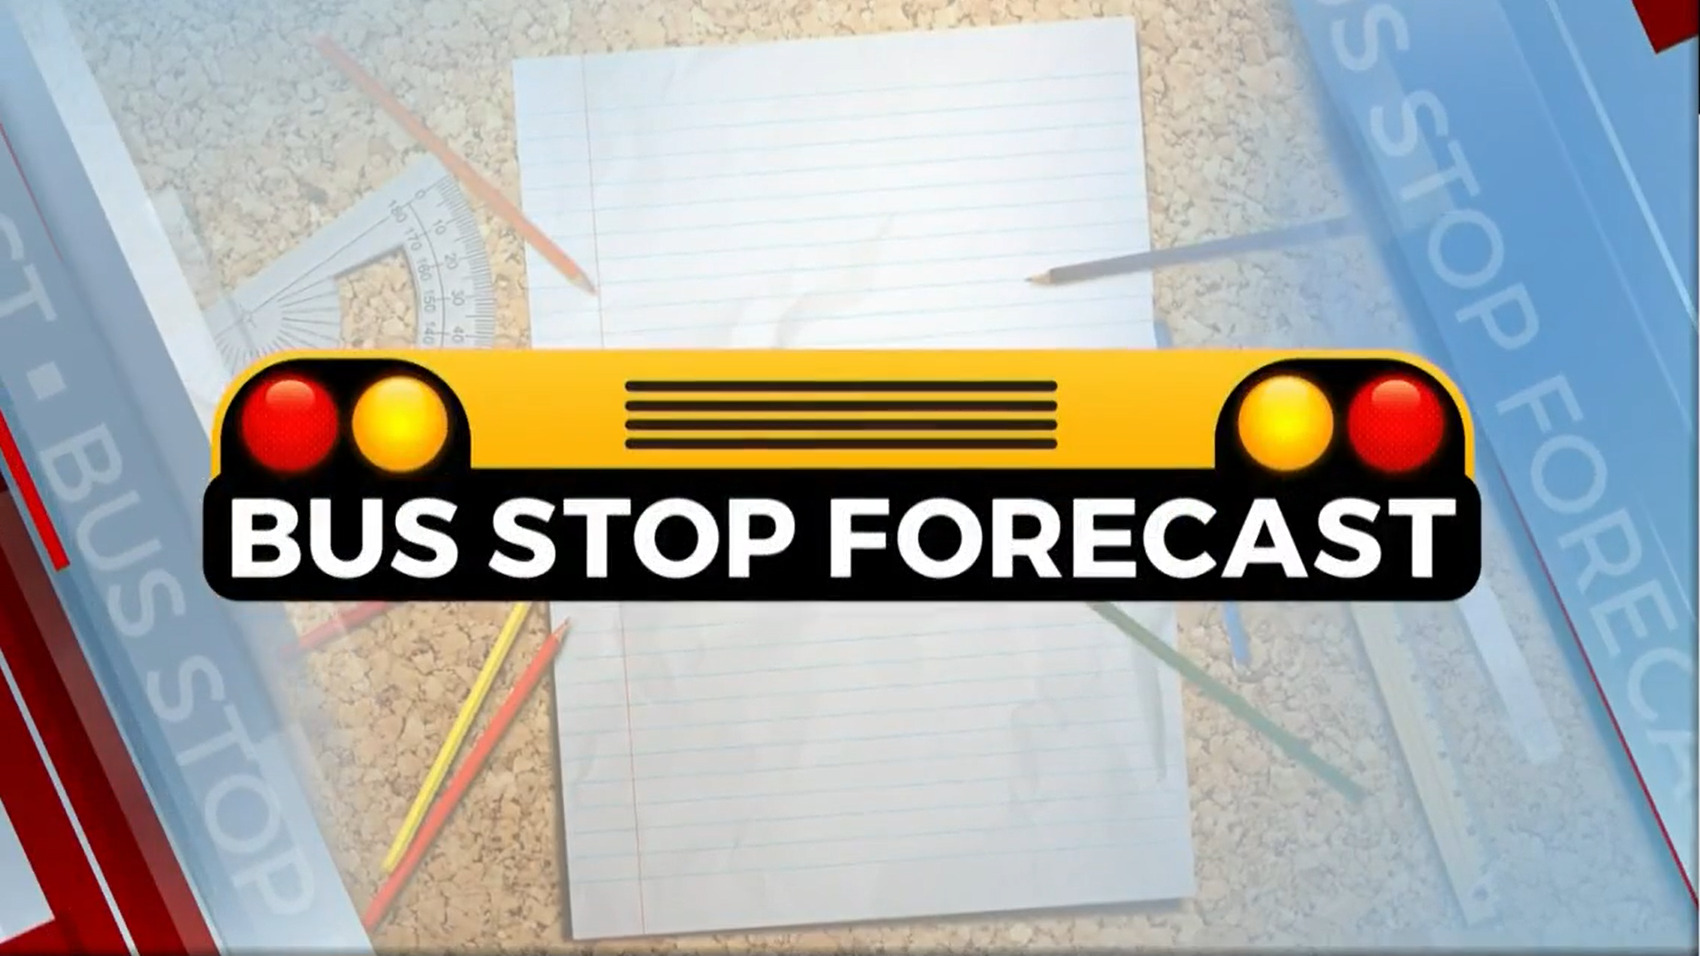 Jed's Monday Bus Stop Forecast